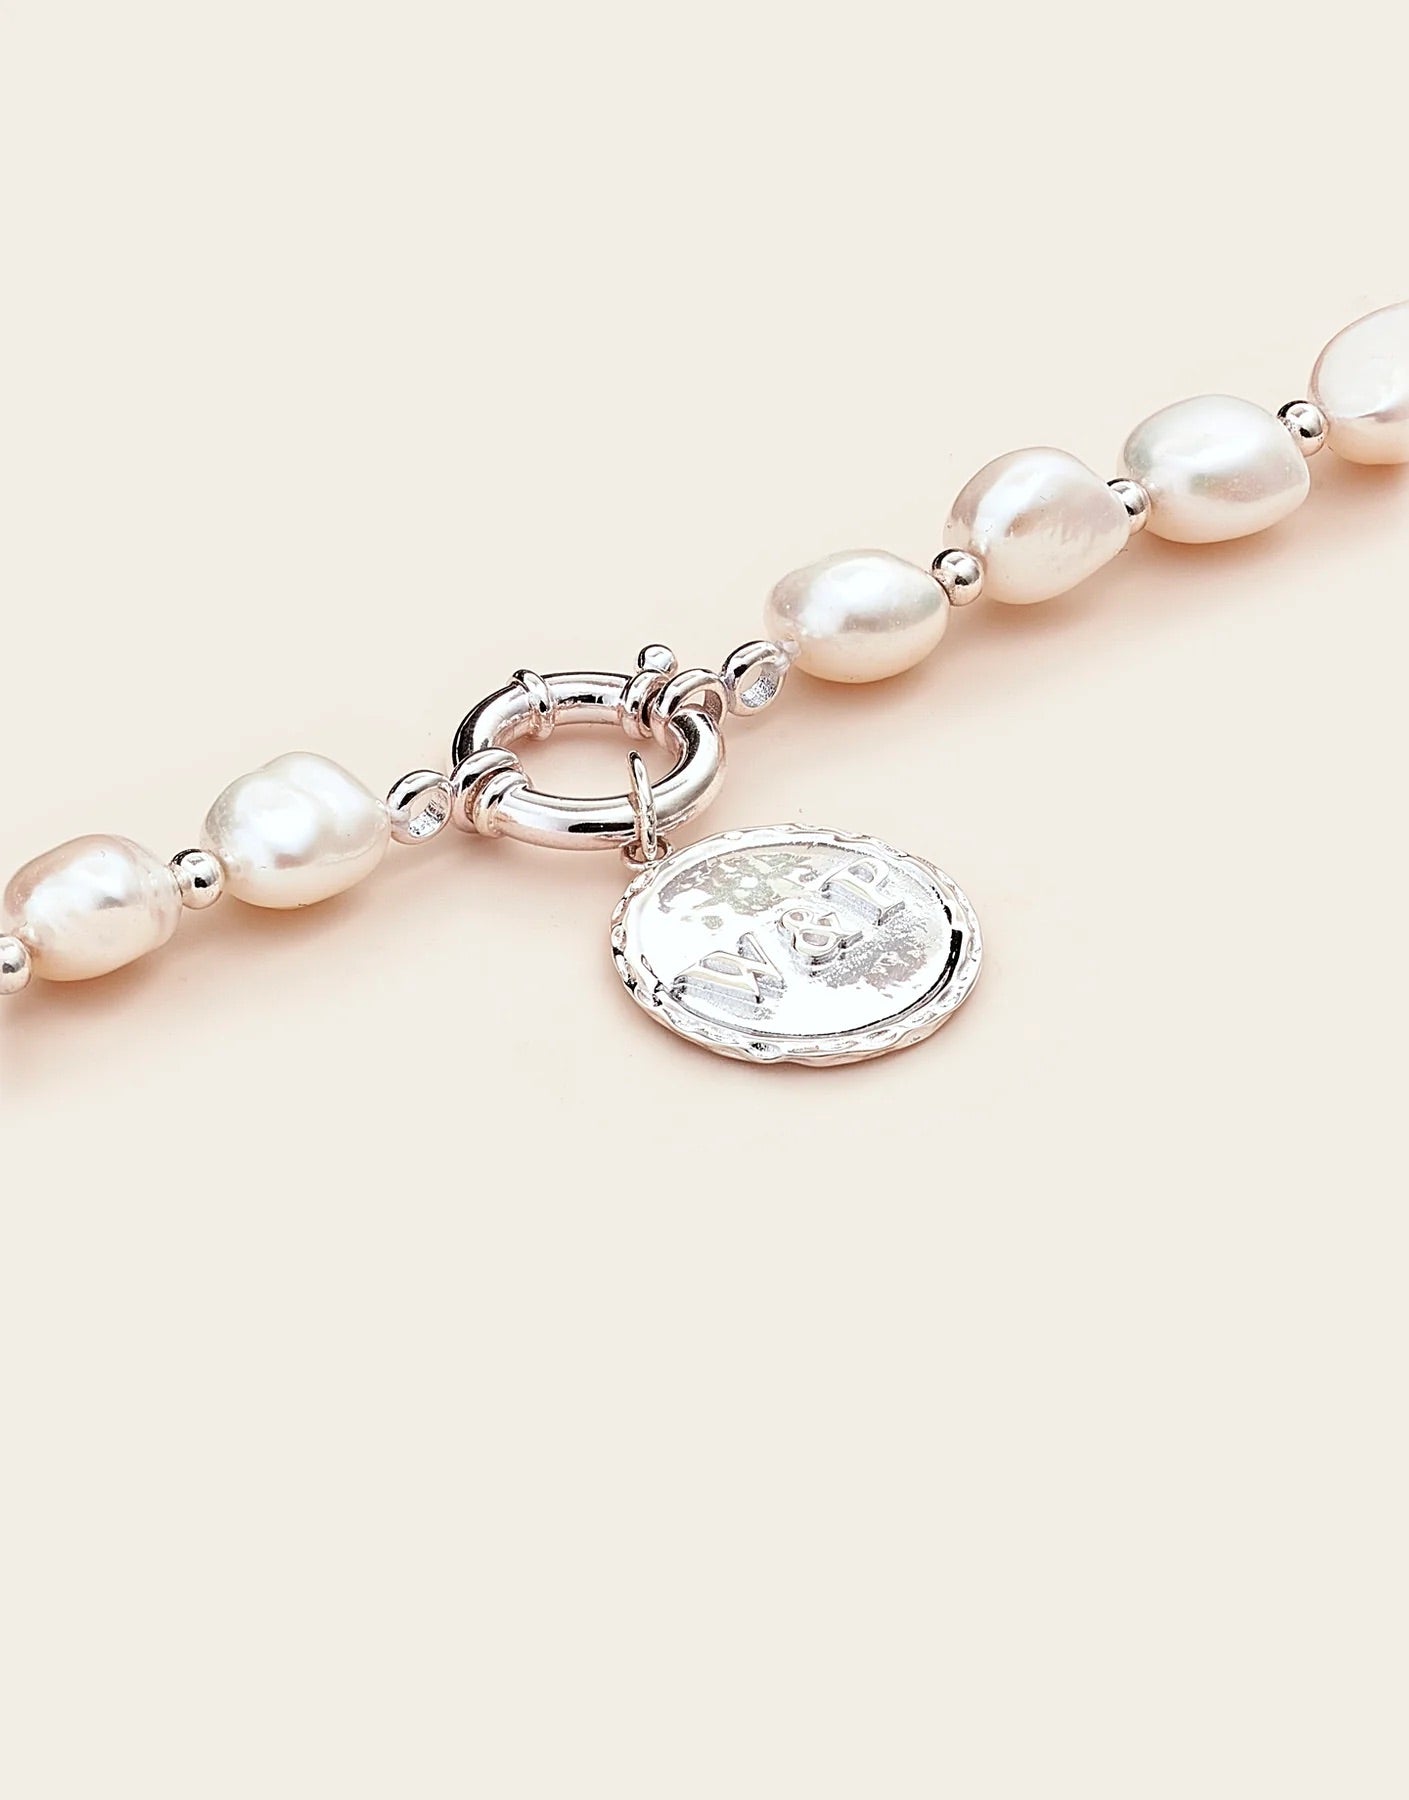 High Country Pearl Bracelet W&P Charm - Stirling silver